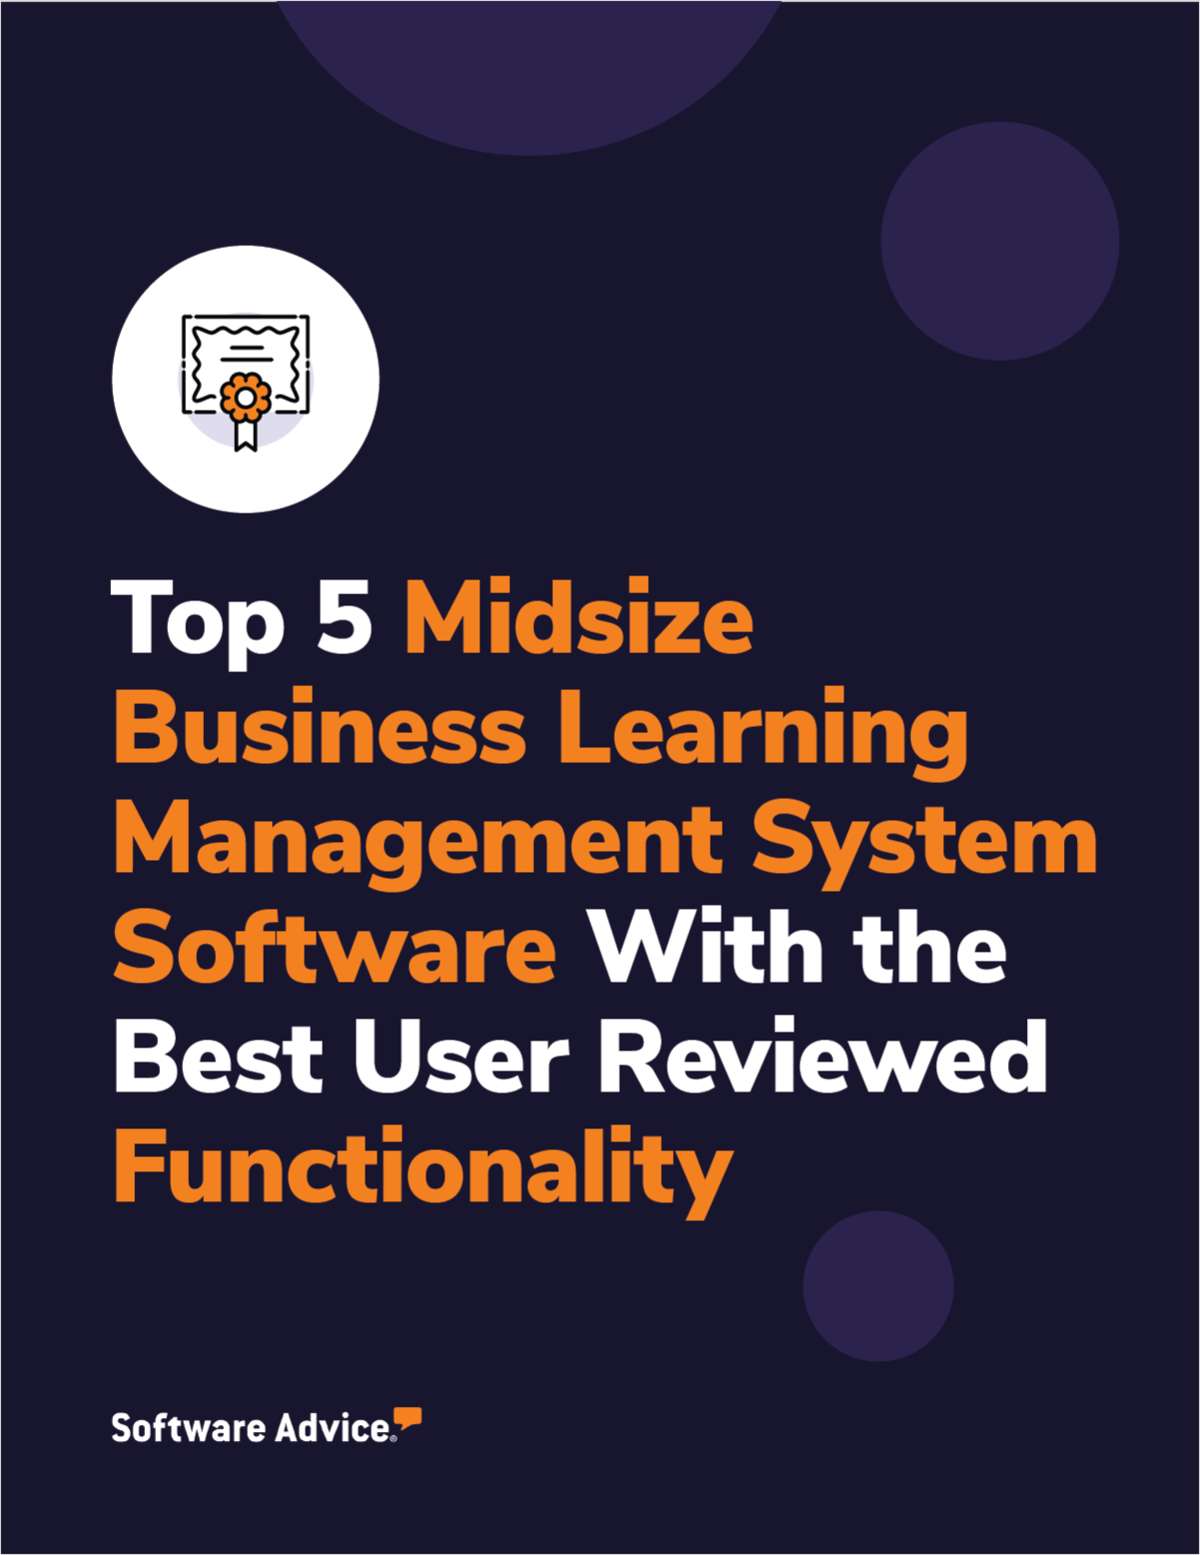 Top 5 Midsize Business Learning Management System Software With the Best User Reviewed Functionality